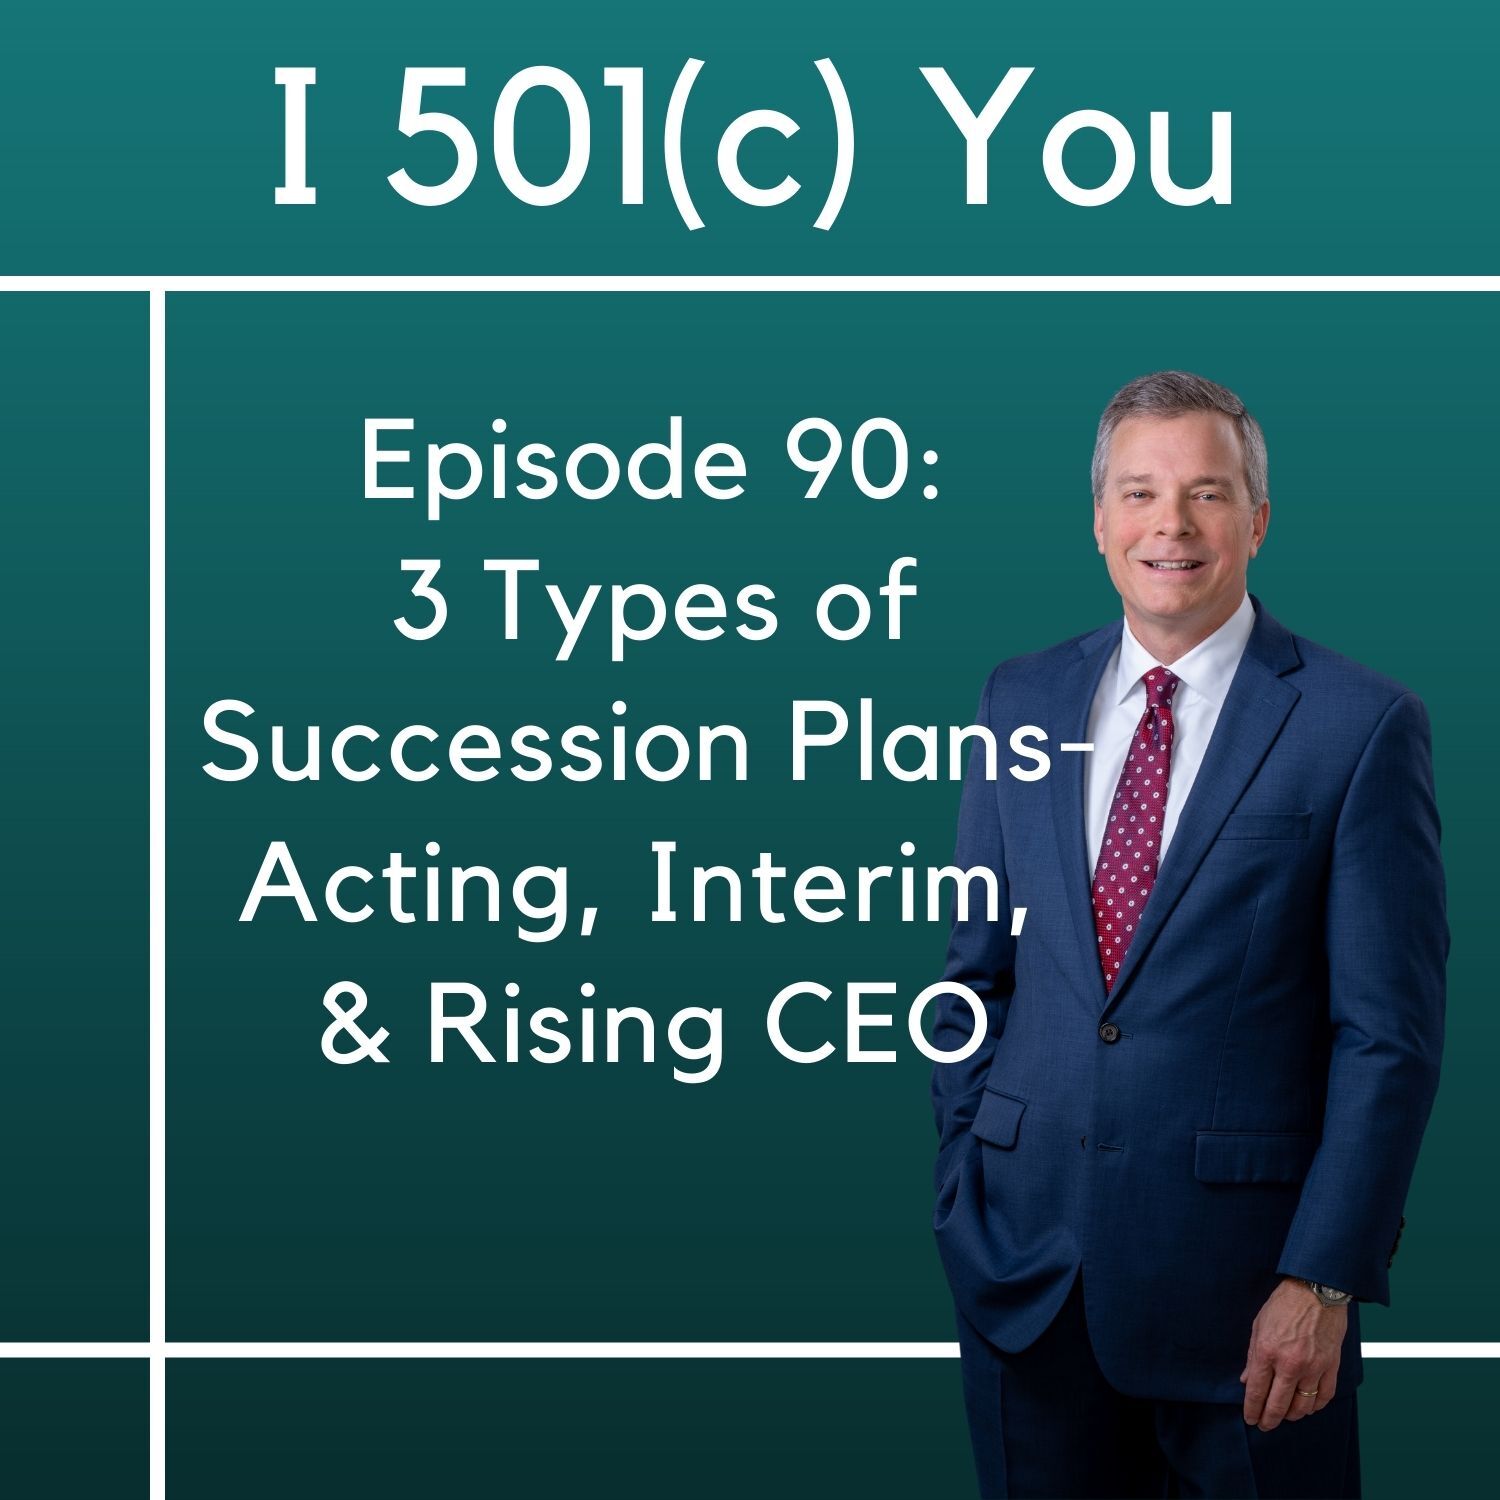 3 Types of Succession Plans: Acting, Interim, and Rising CEO